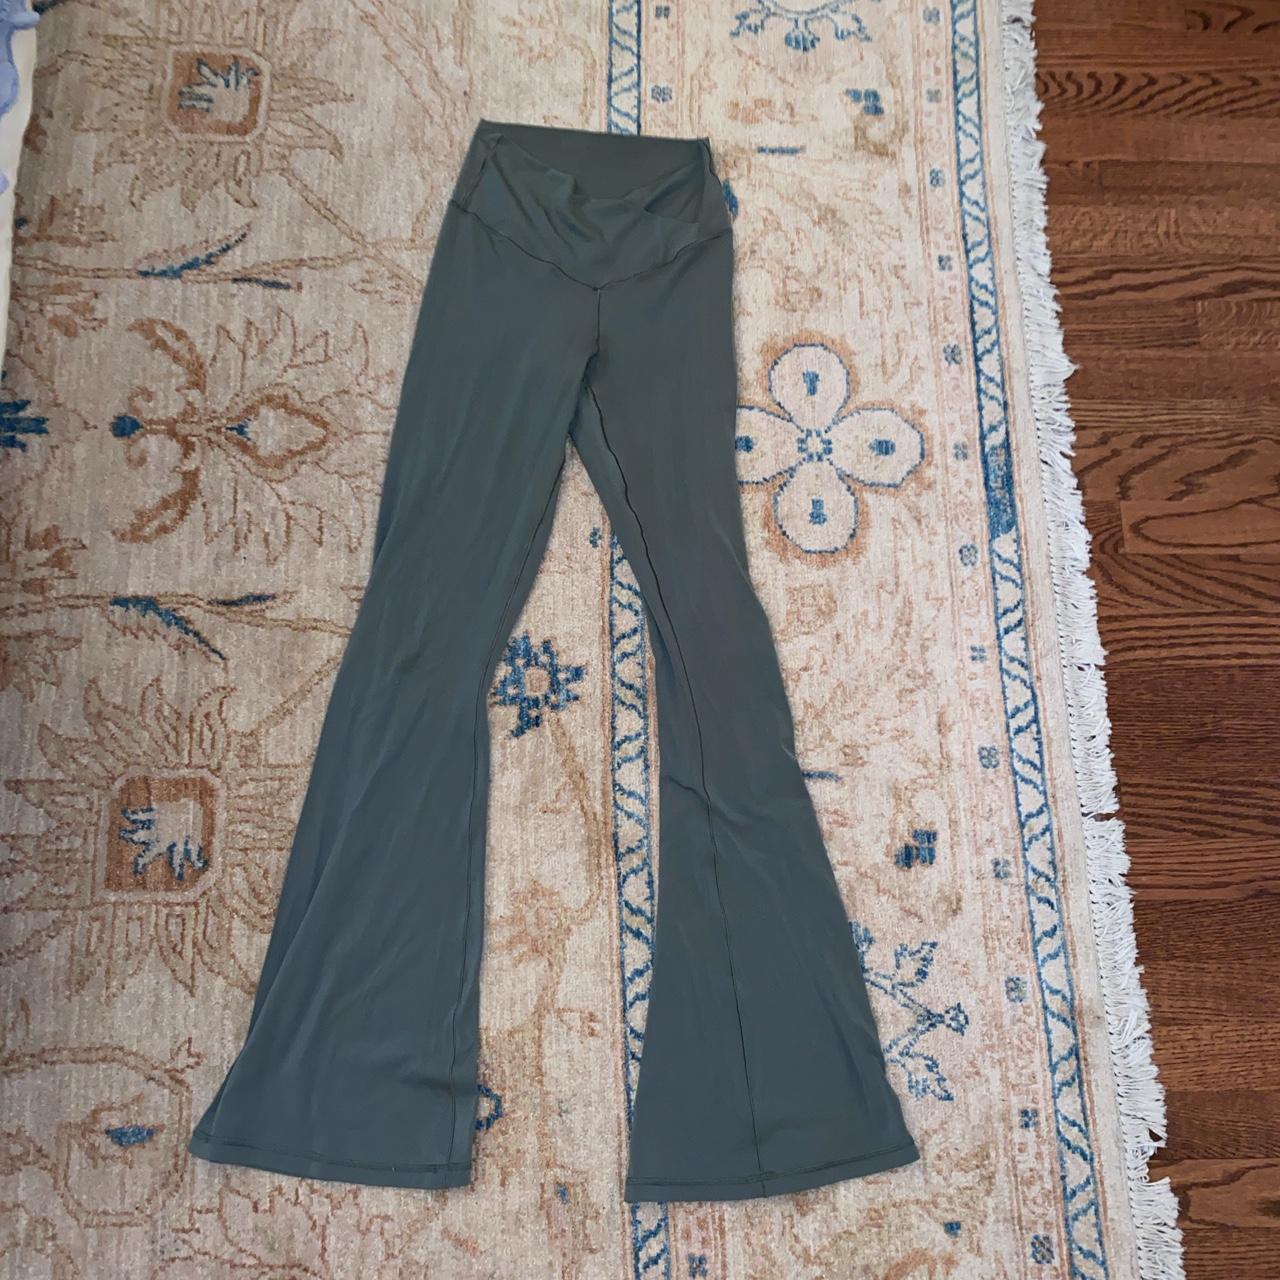 Aerie high waisted crossover leggings Different - Depop